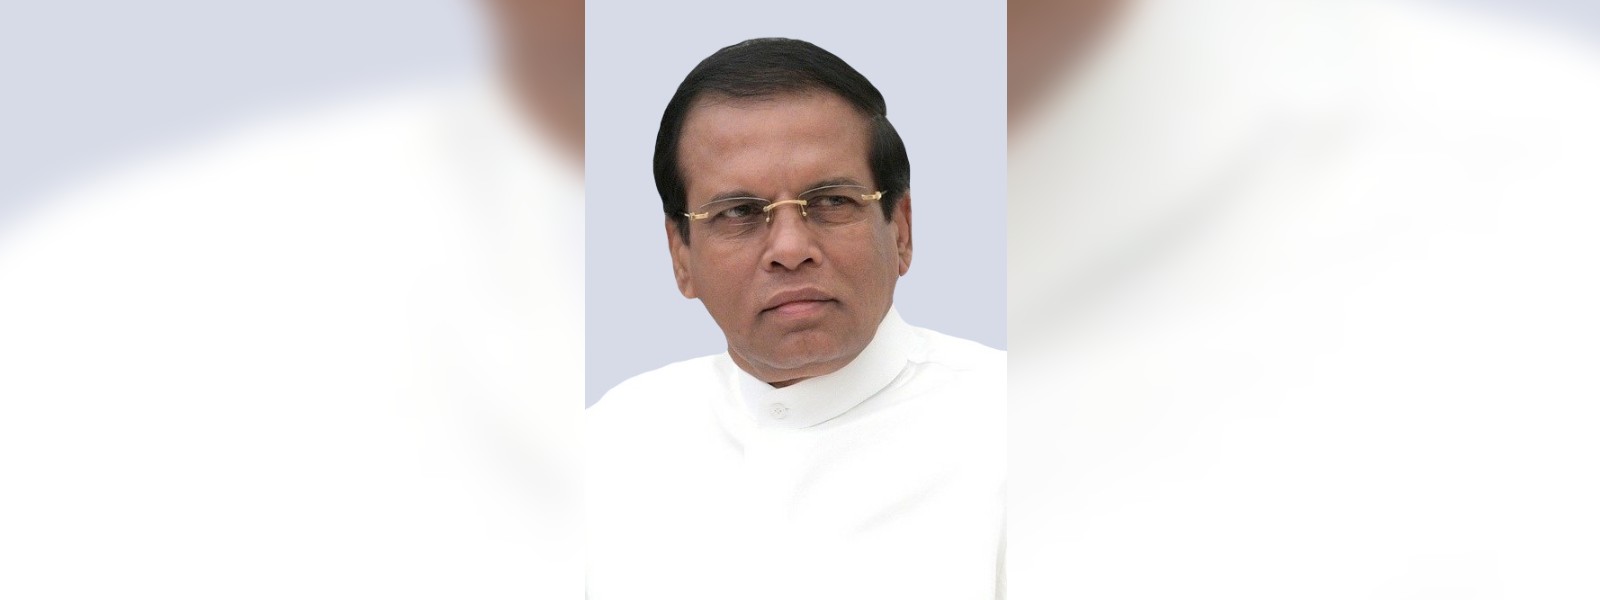 April 21st attacks: Sirisena says govt. failed to abide by his instructions